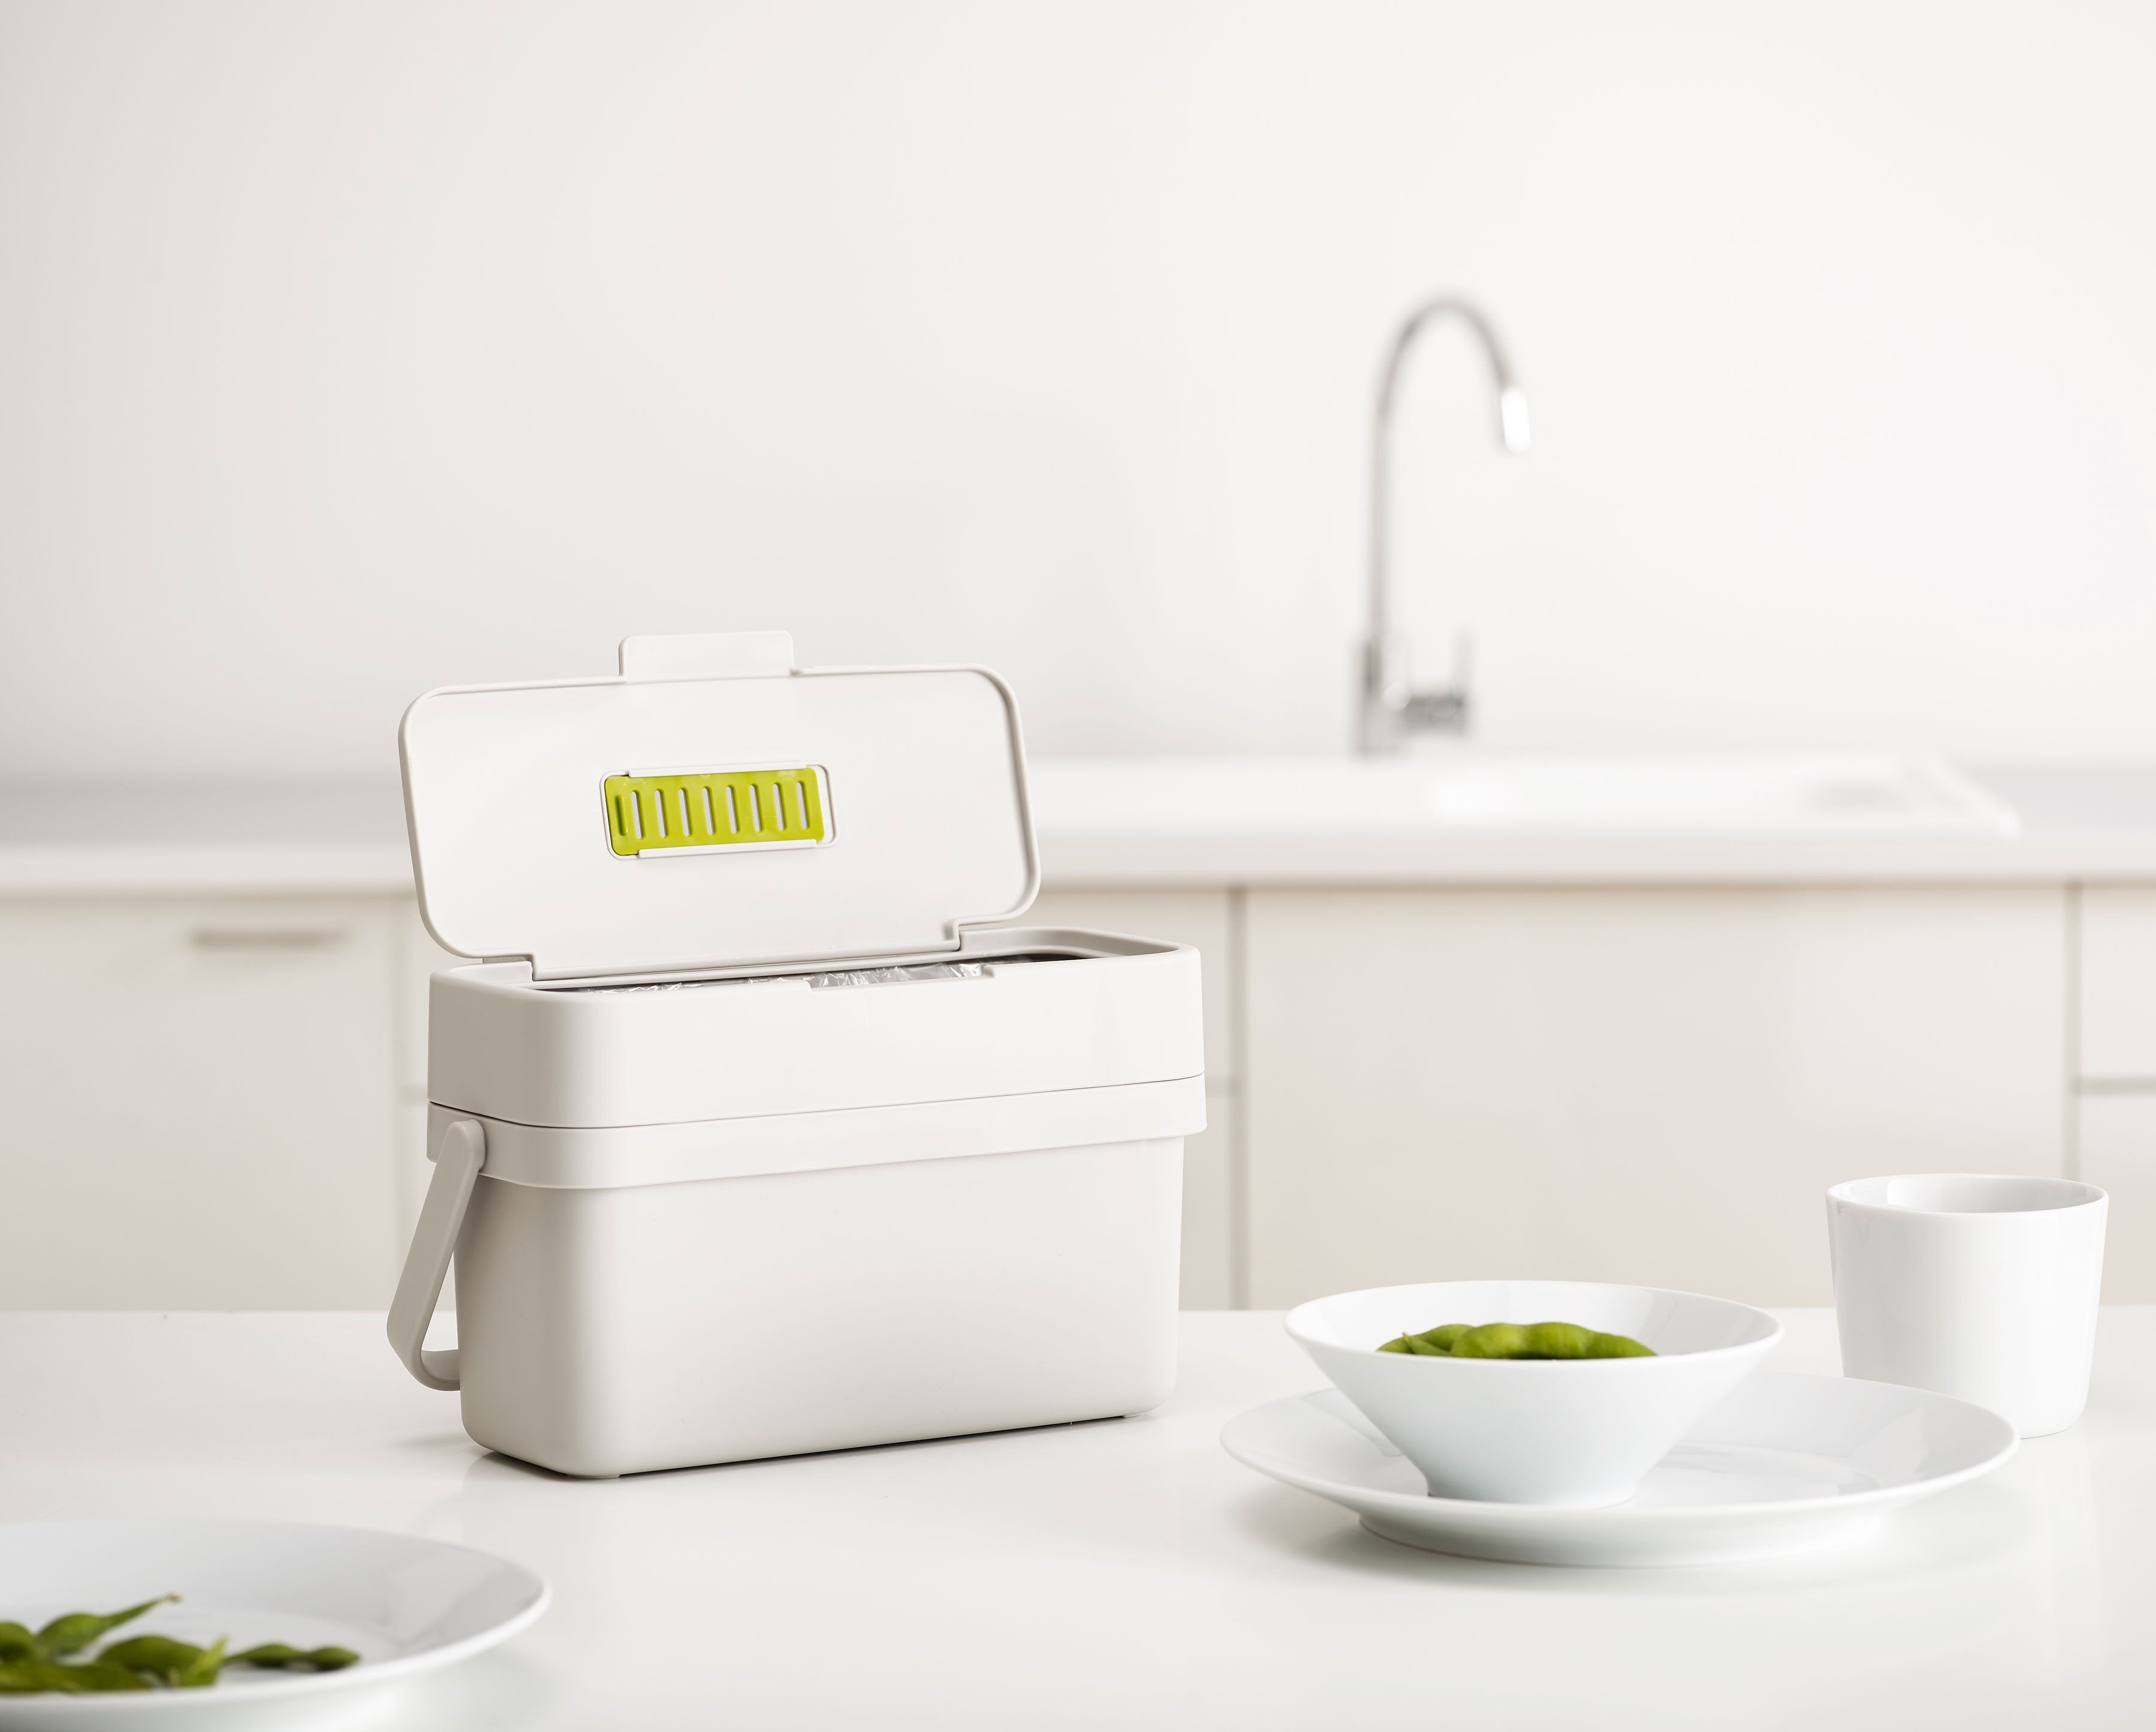 BEON.COM.AU  This slimline food waste caddy is designed to make collecting food scraps easier as it features a convenient flip-up lid and extra wide opening.  Wide aperture makes scraping food from plates easier Adjustable air vent: open - helps reduce moisture and odour build-up; closed - provides insect ba... Joseph Joseph at BEON.COM.AU